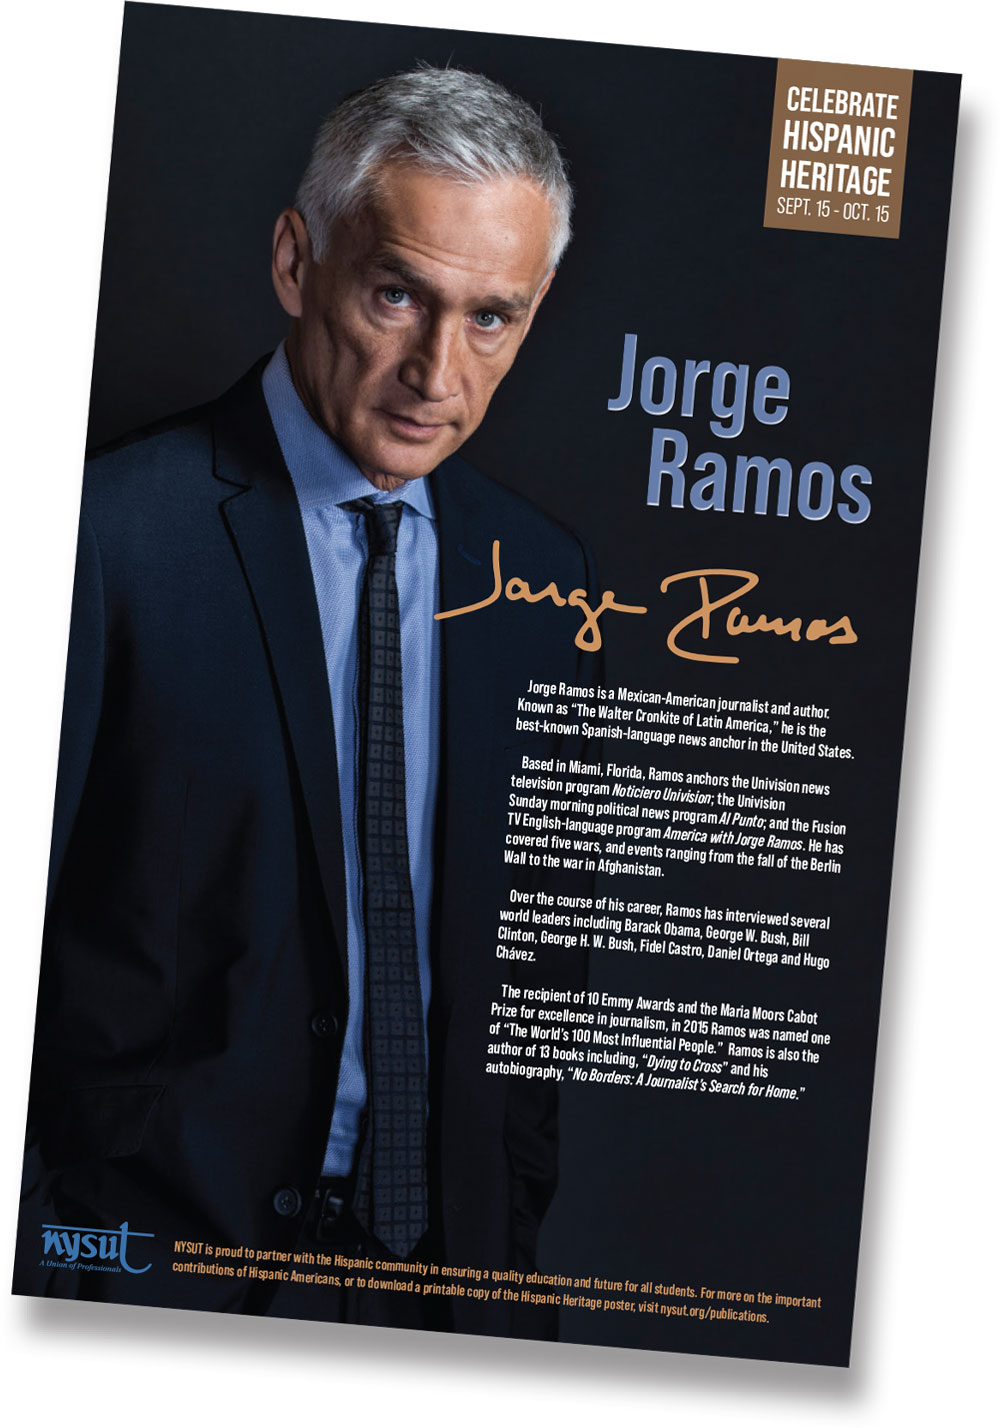 Poster of Jorge Ramos with a banner that read Celebrate Hispanic Heritage September 15 to October 15